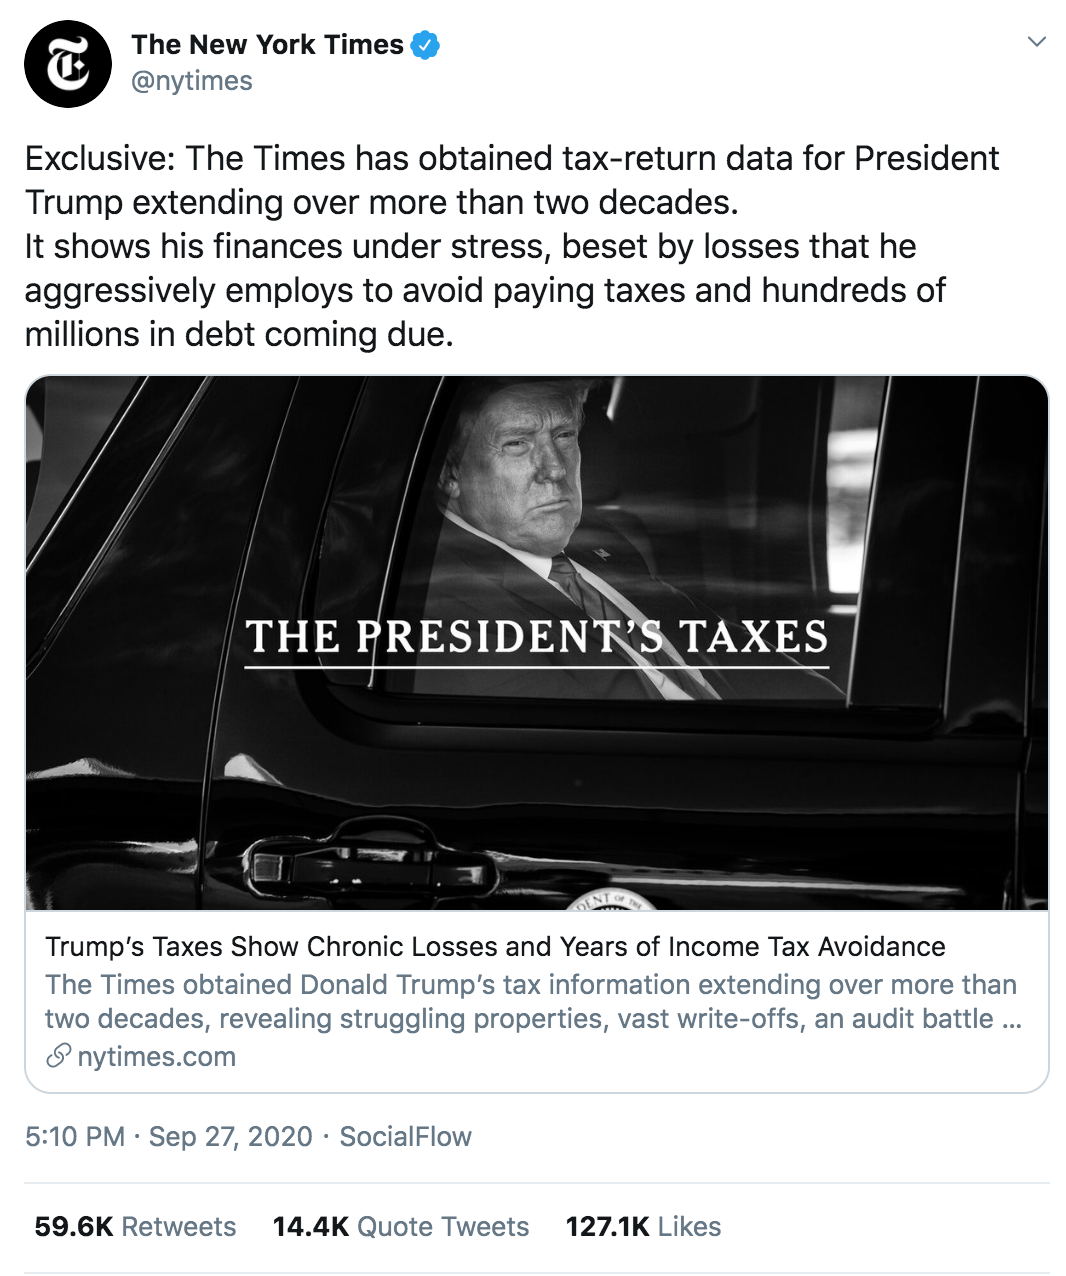 Trump NYT Reactions - The New York Times Exclusive The Times has obtained taxreturn data for President Trump extending over more than two decades. It shows his finances under stress, beset by losses that he aggressively employs to avoid paying taxes and